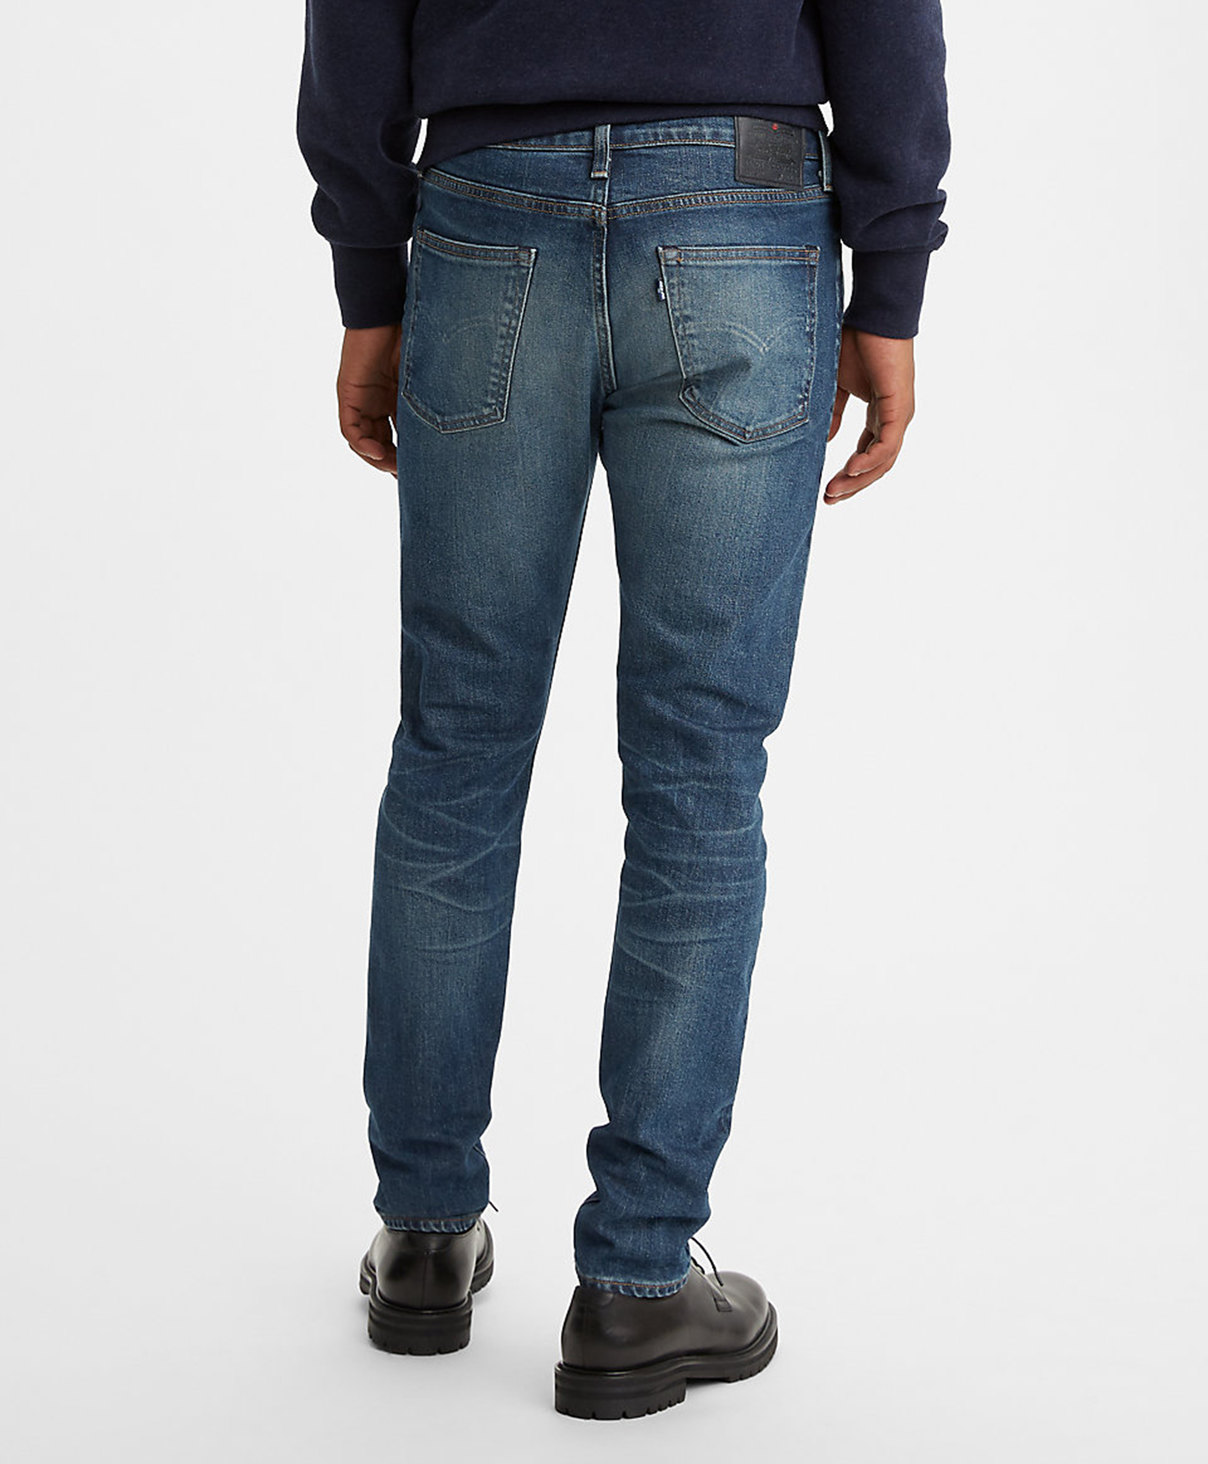 Levi's Made & Crafted Made in Japan 512 Slim Taper Fit Jeans | Levi